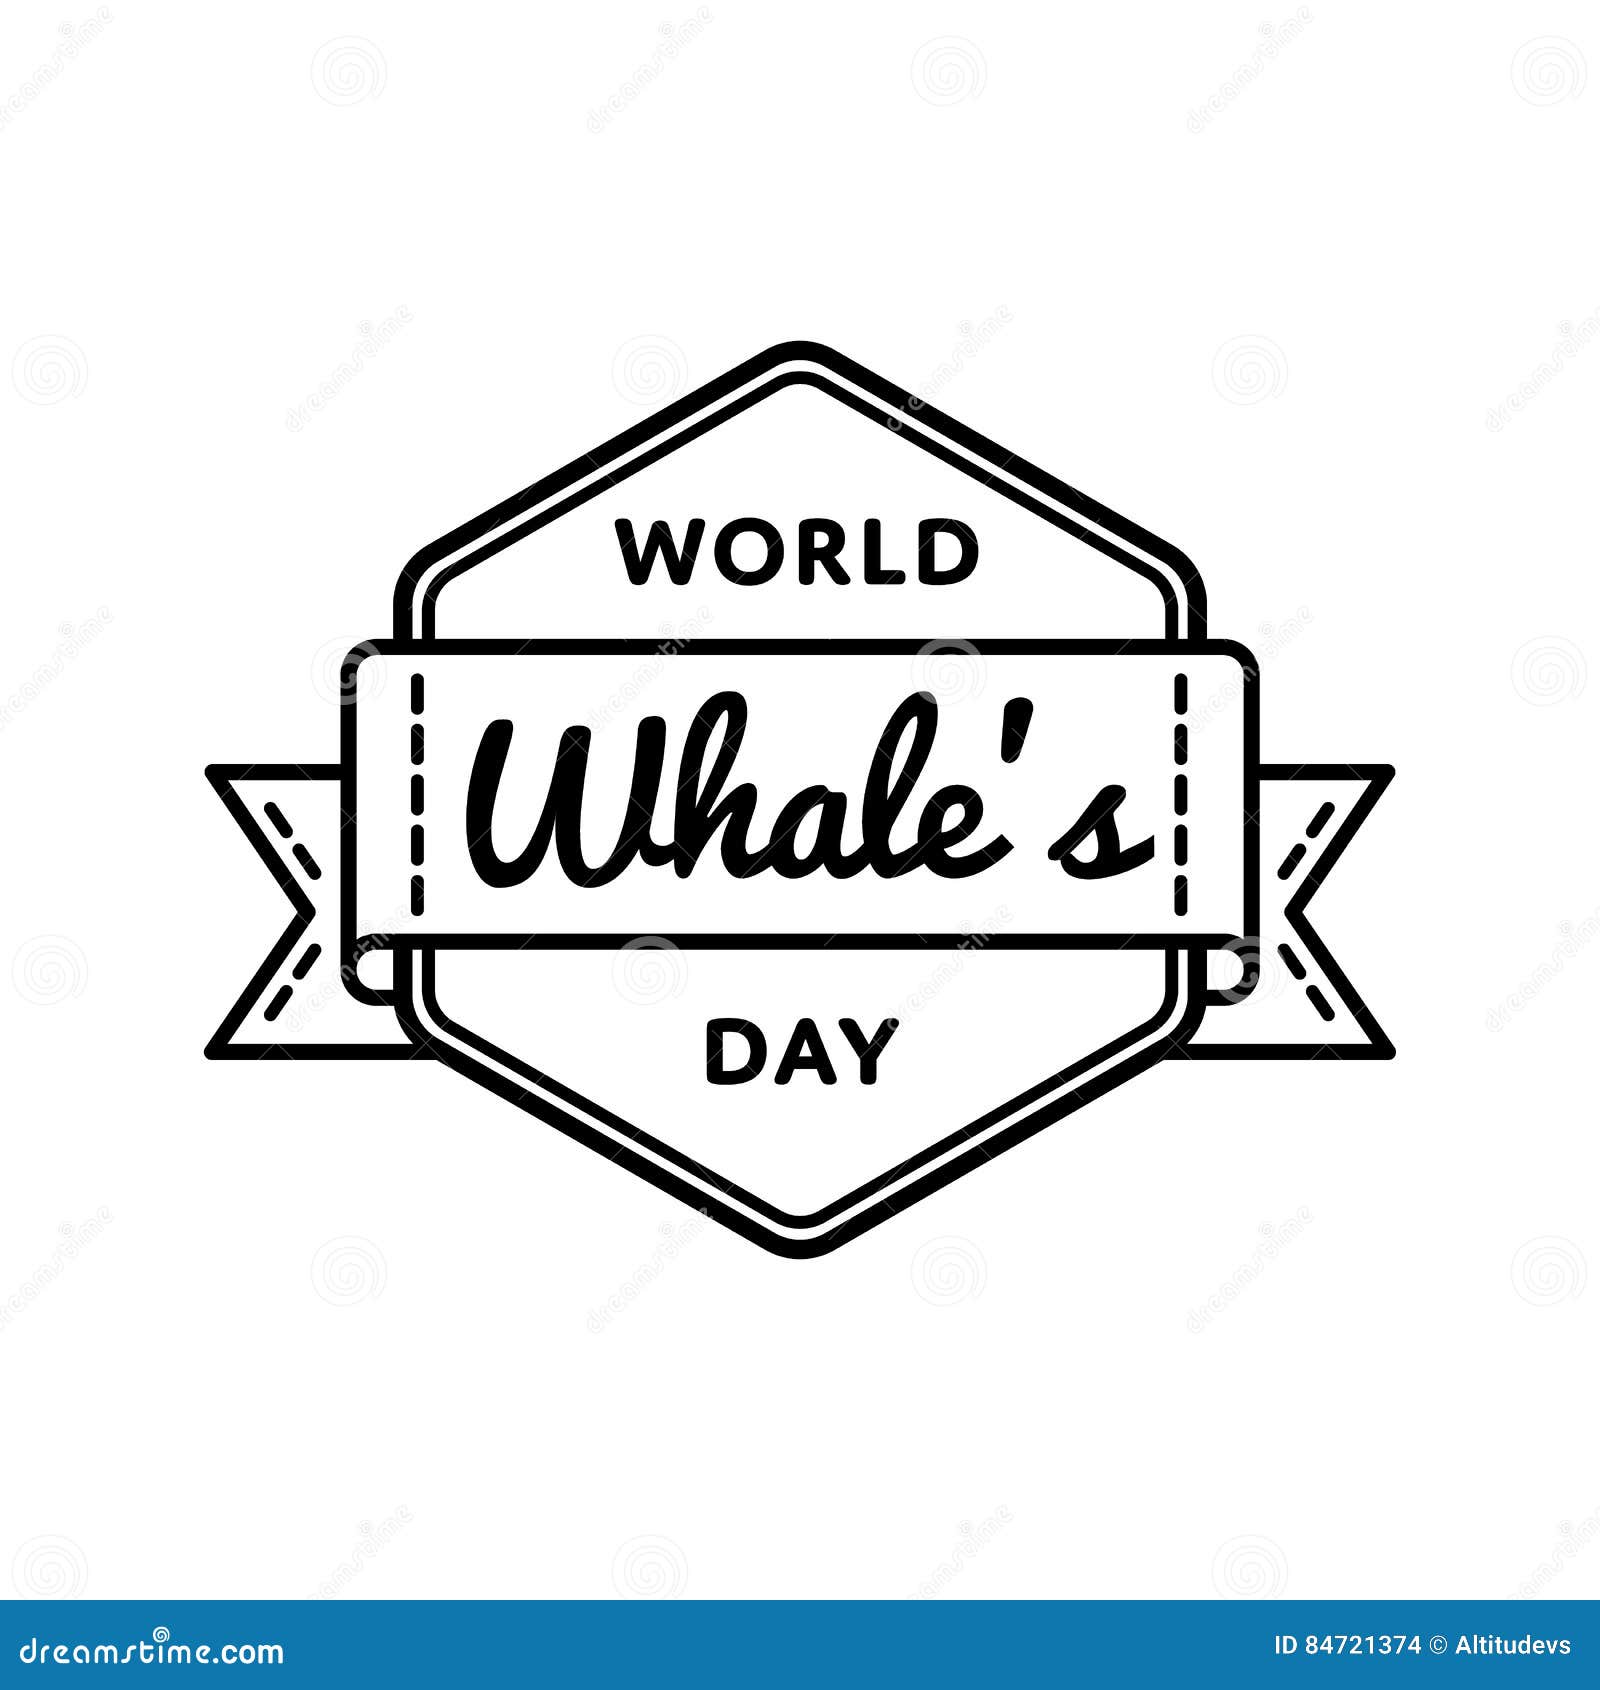 World Whales Day Greeting Emblem Stock Vector Illustration of festive